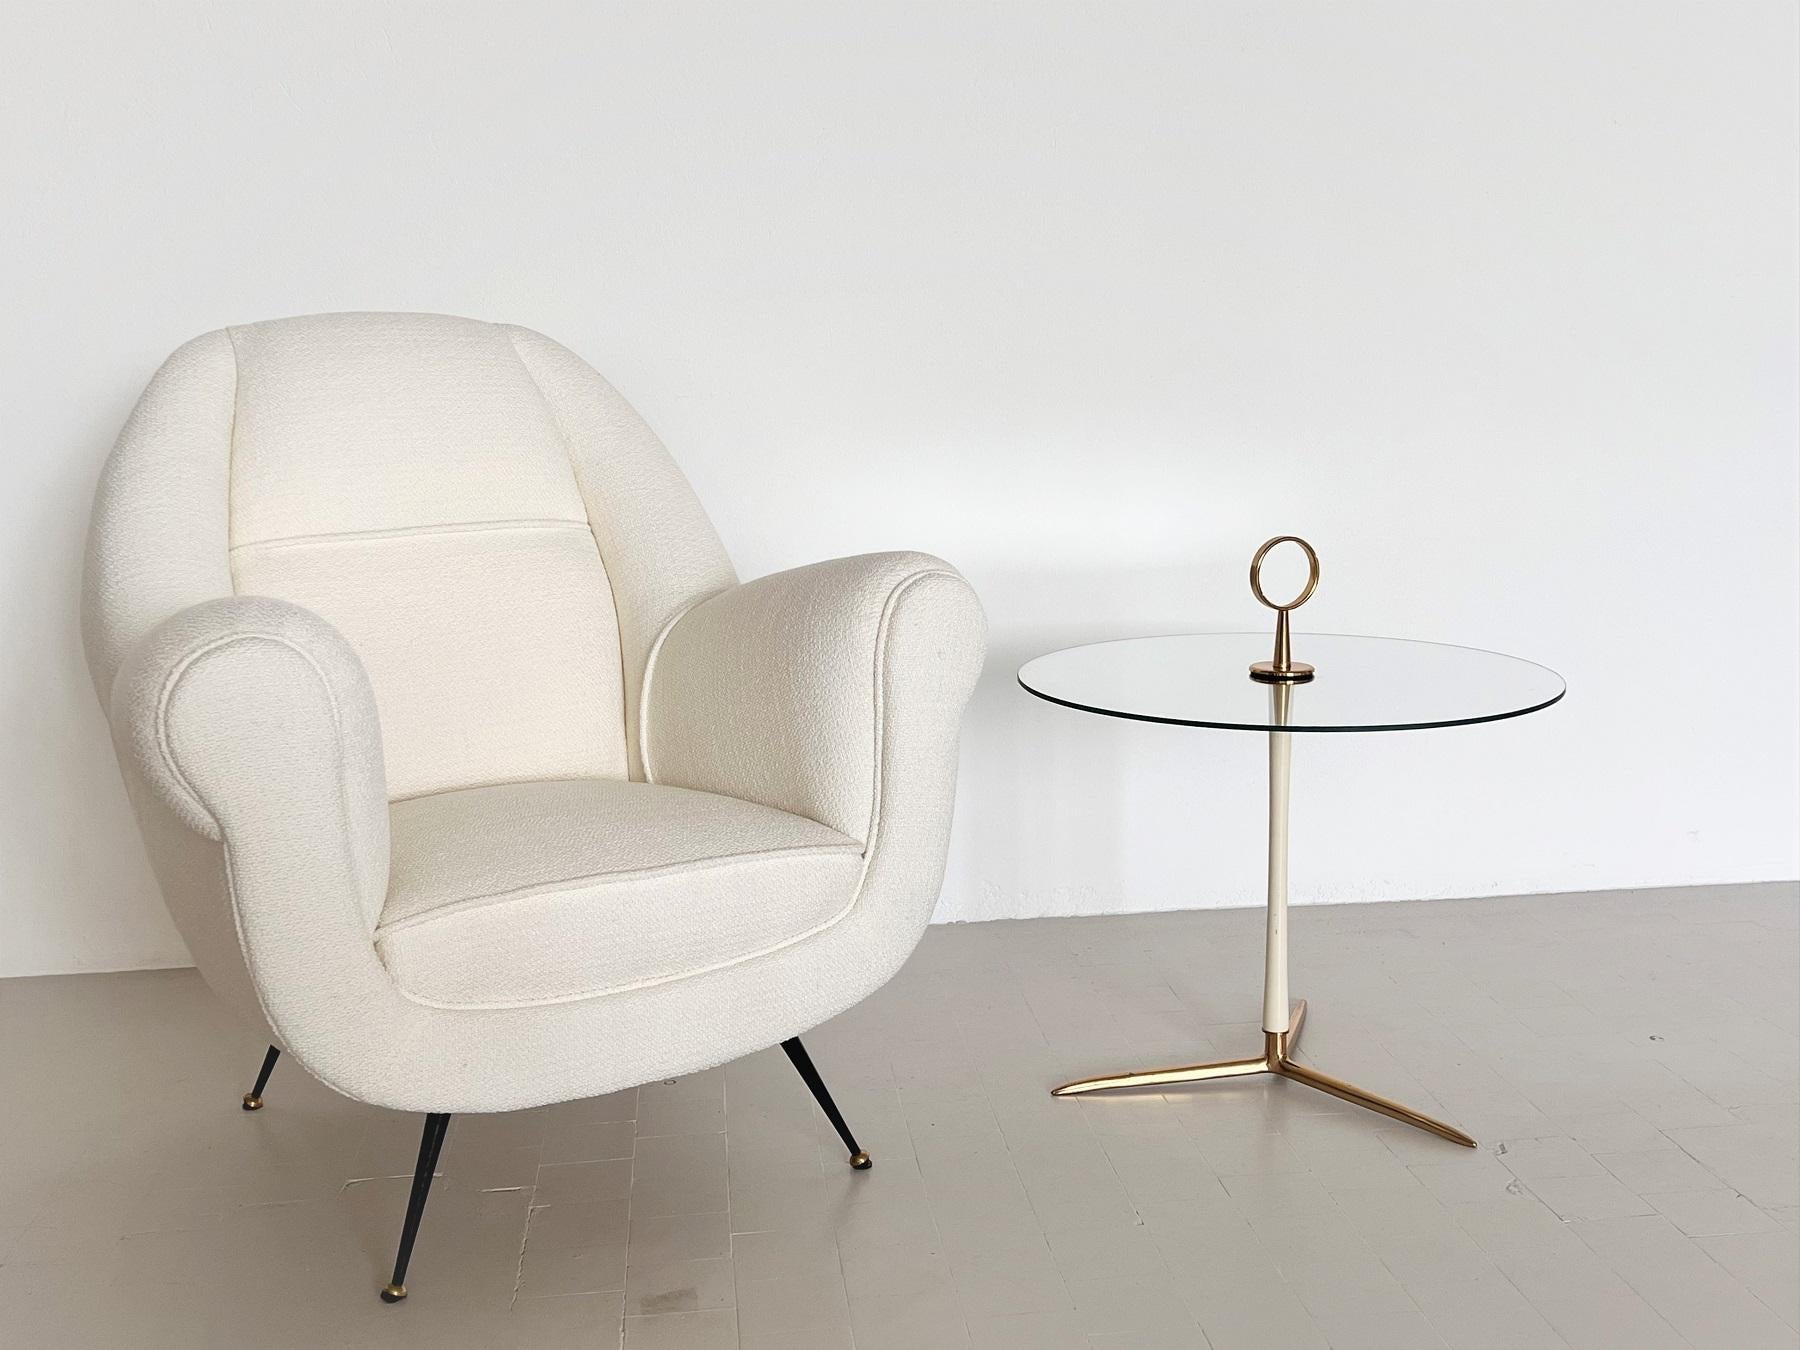 Gorgeous side table manufactured in Germany from Vereinigte Werkstätten in the 1970s.
This table is made of materials of high quality and has an absolute striking simple but beautiful and elegant shape. It has a solid brass tripod base, a white